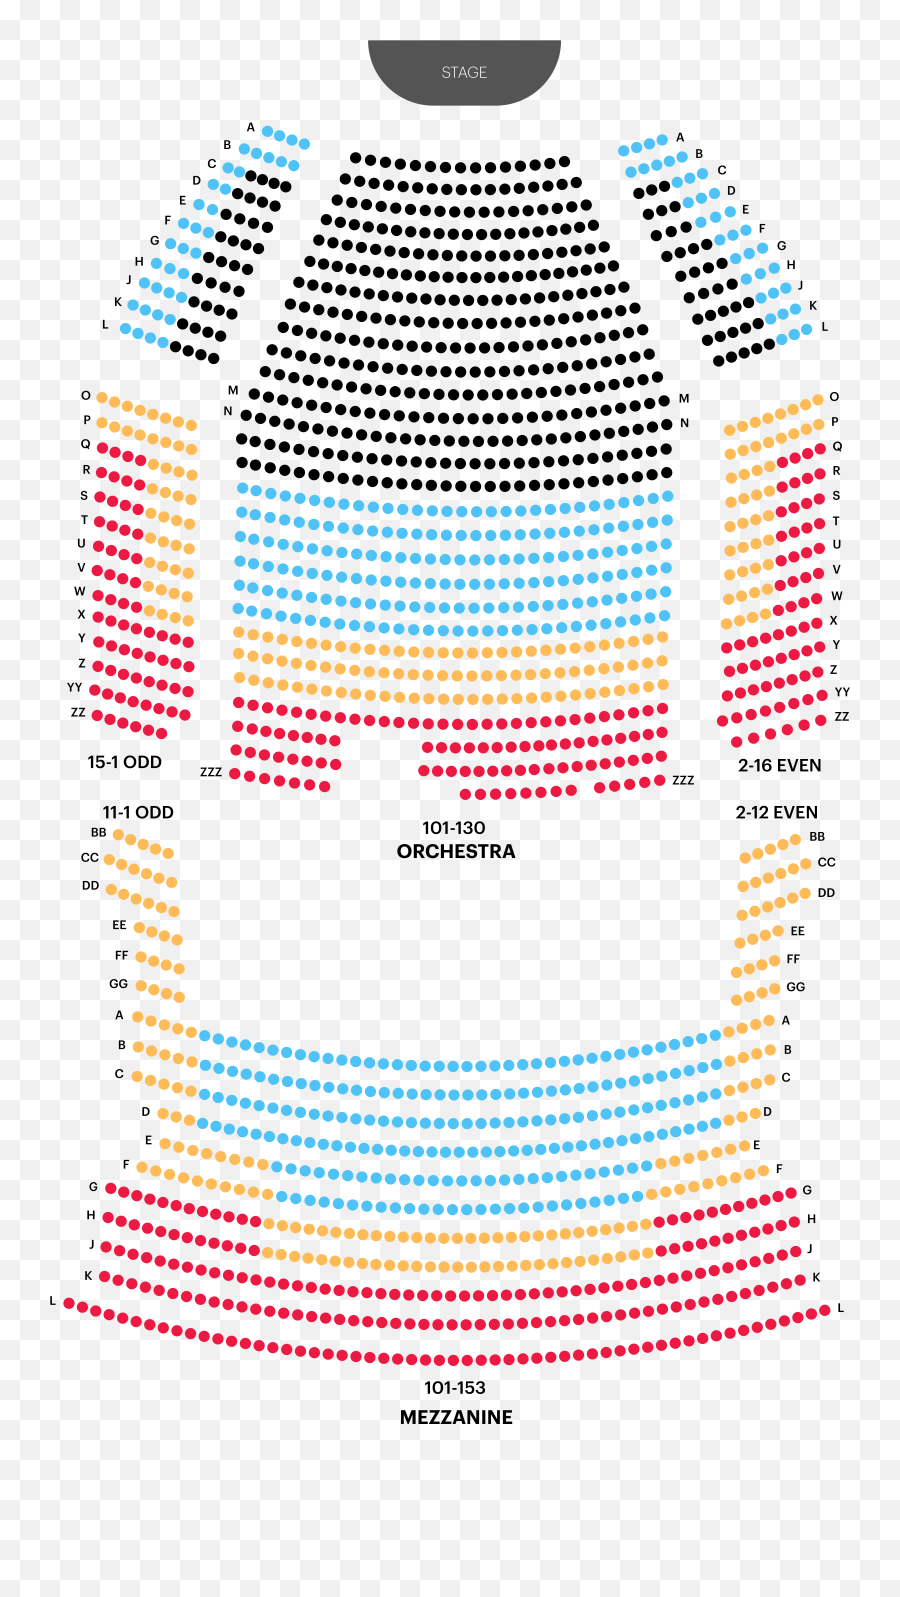 Minskoff Theatre Seating Chart - Star Theatre Seating Plan Emoji,Live Action Lion King Needs More Emotions In Faces